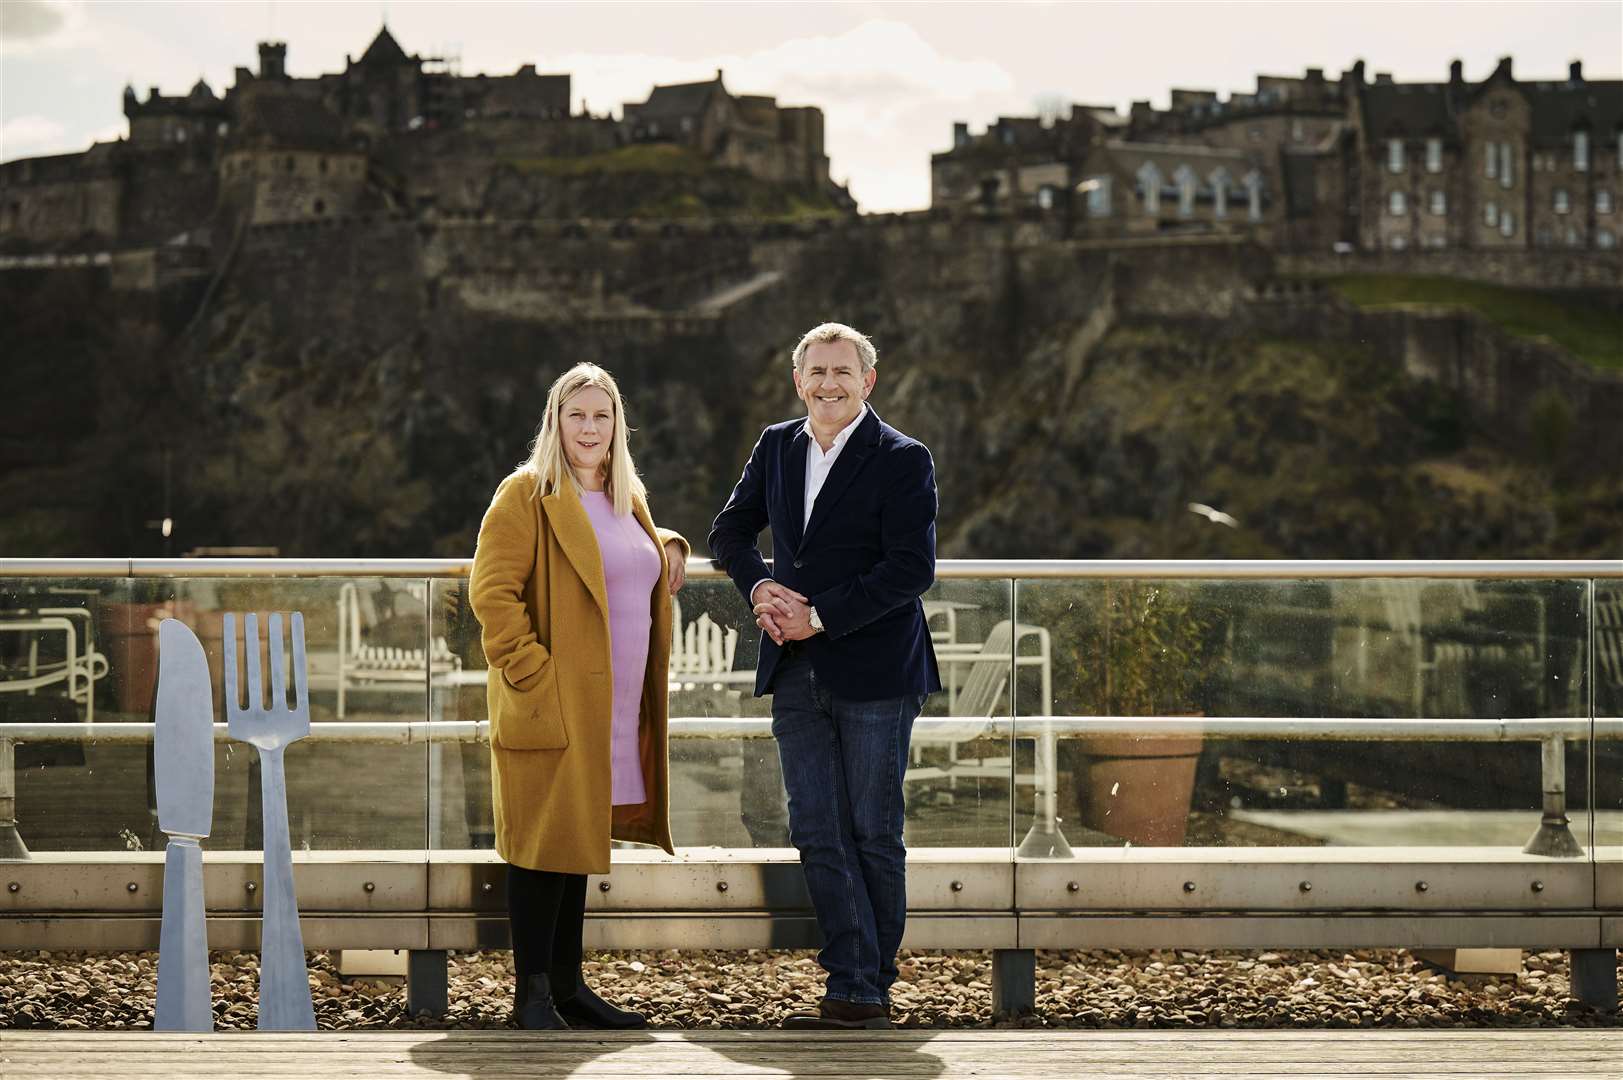 Muckle Media, the creative communications agency, has acquired Taste Communications Scotland in a six-figure deal. L to R, Nathalie Agnew (Muckle Media) and Stephen Jardine (Taste Communications Scotland).